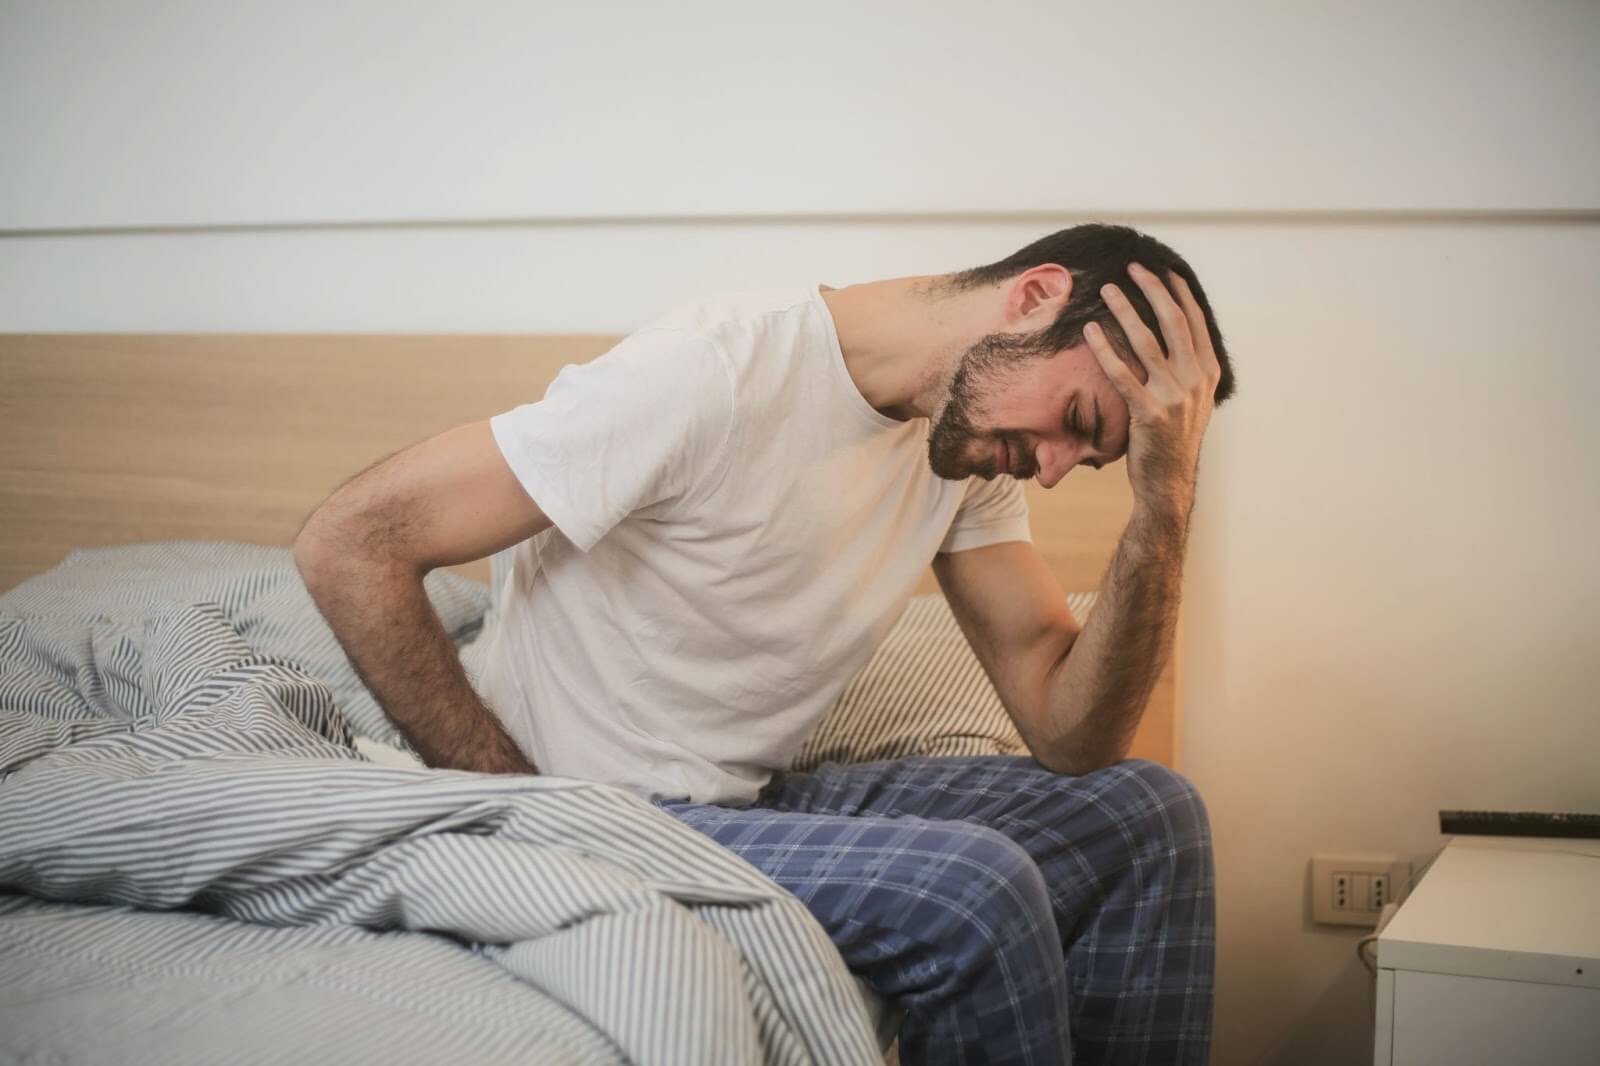 Insomnia can be aggravated by REM rebound and result in deficiencies in overall well-being.